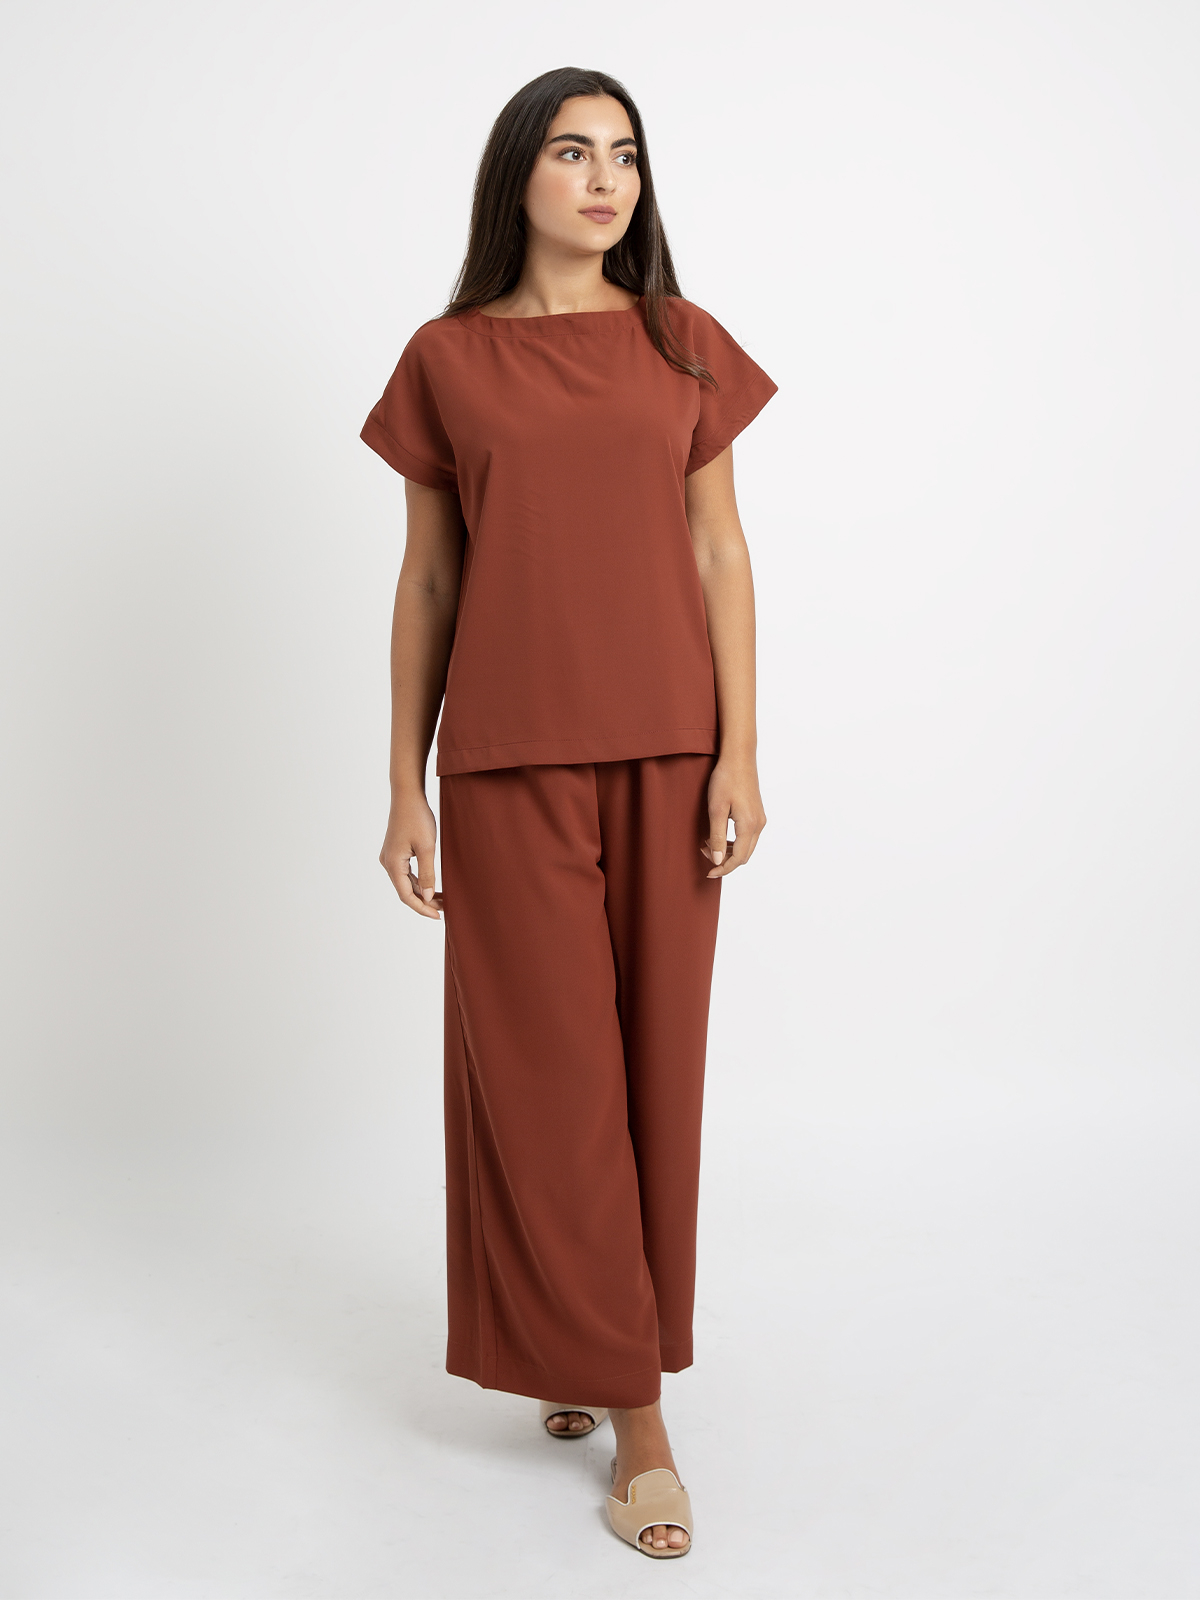 Kaafmeem women clothing brick trouser and top under the abaya matching set in soft fabric coords for everyday wear